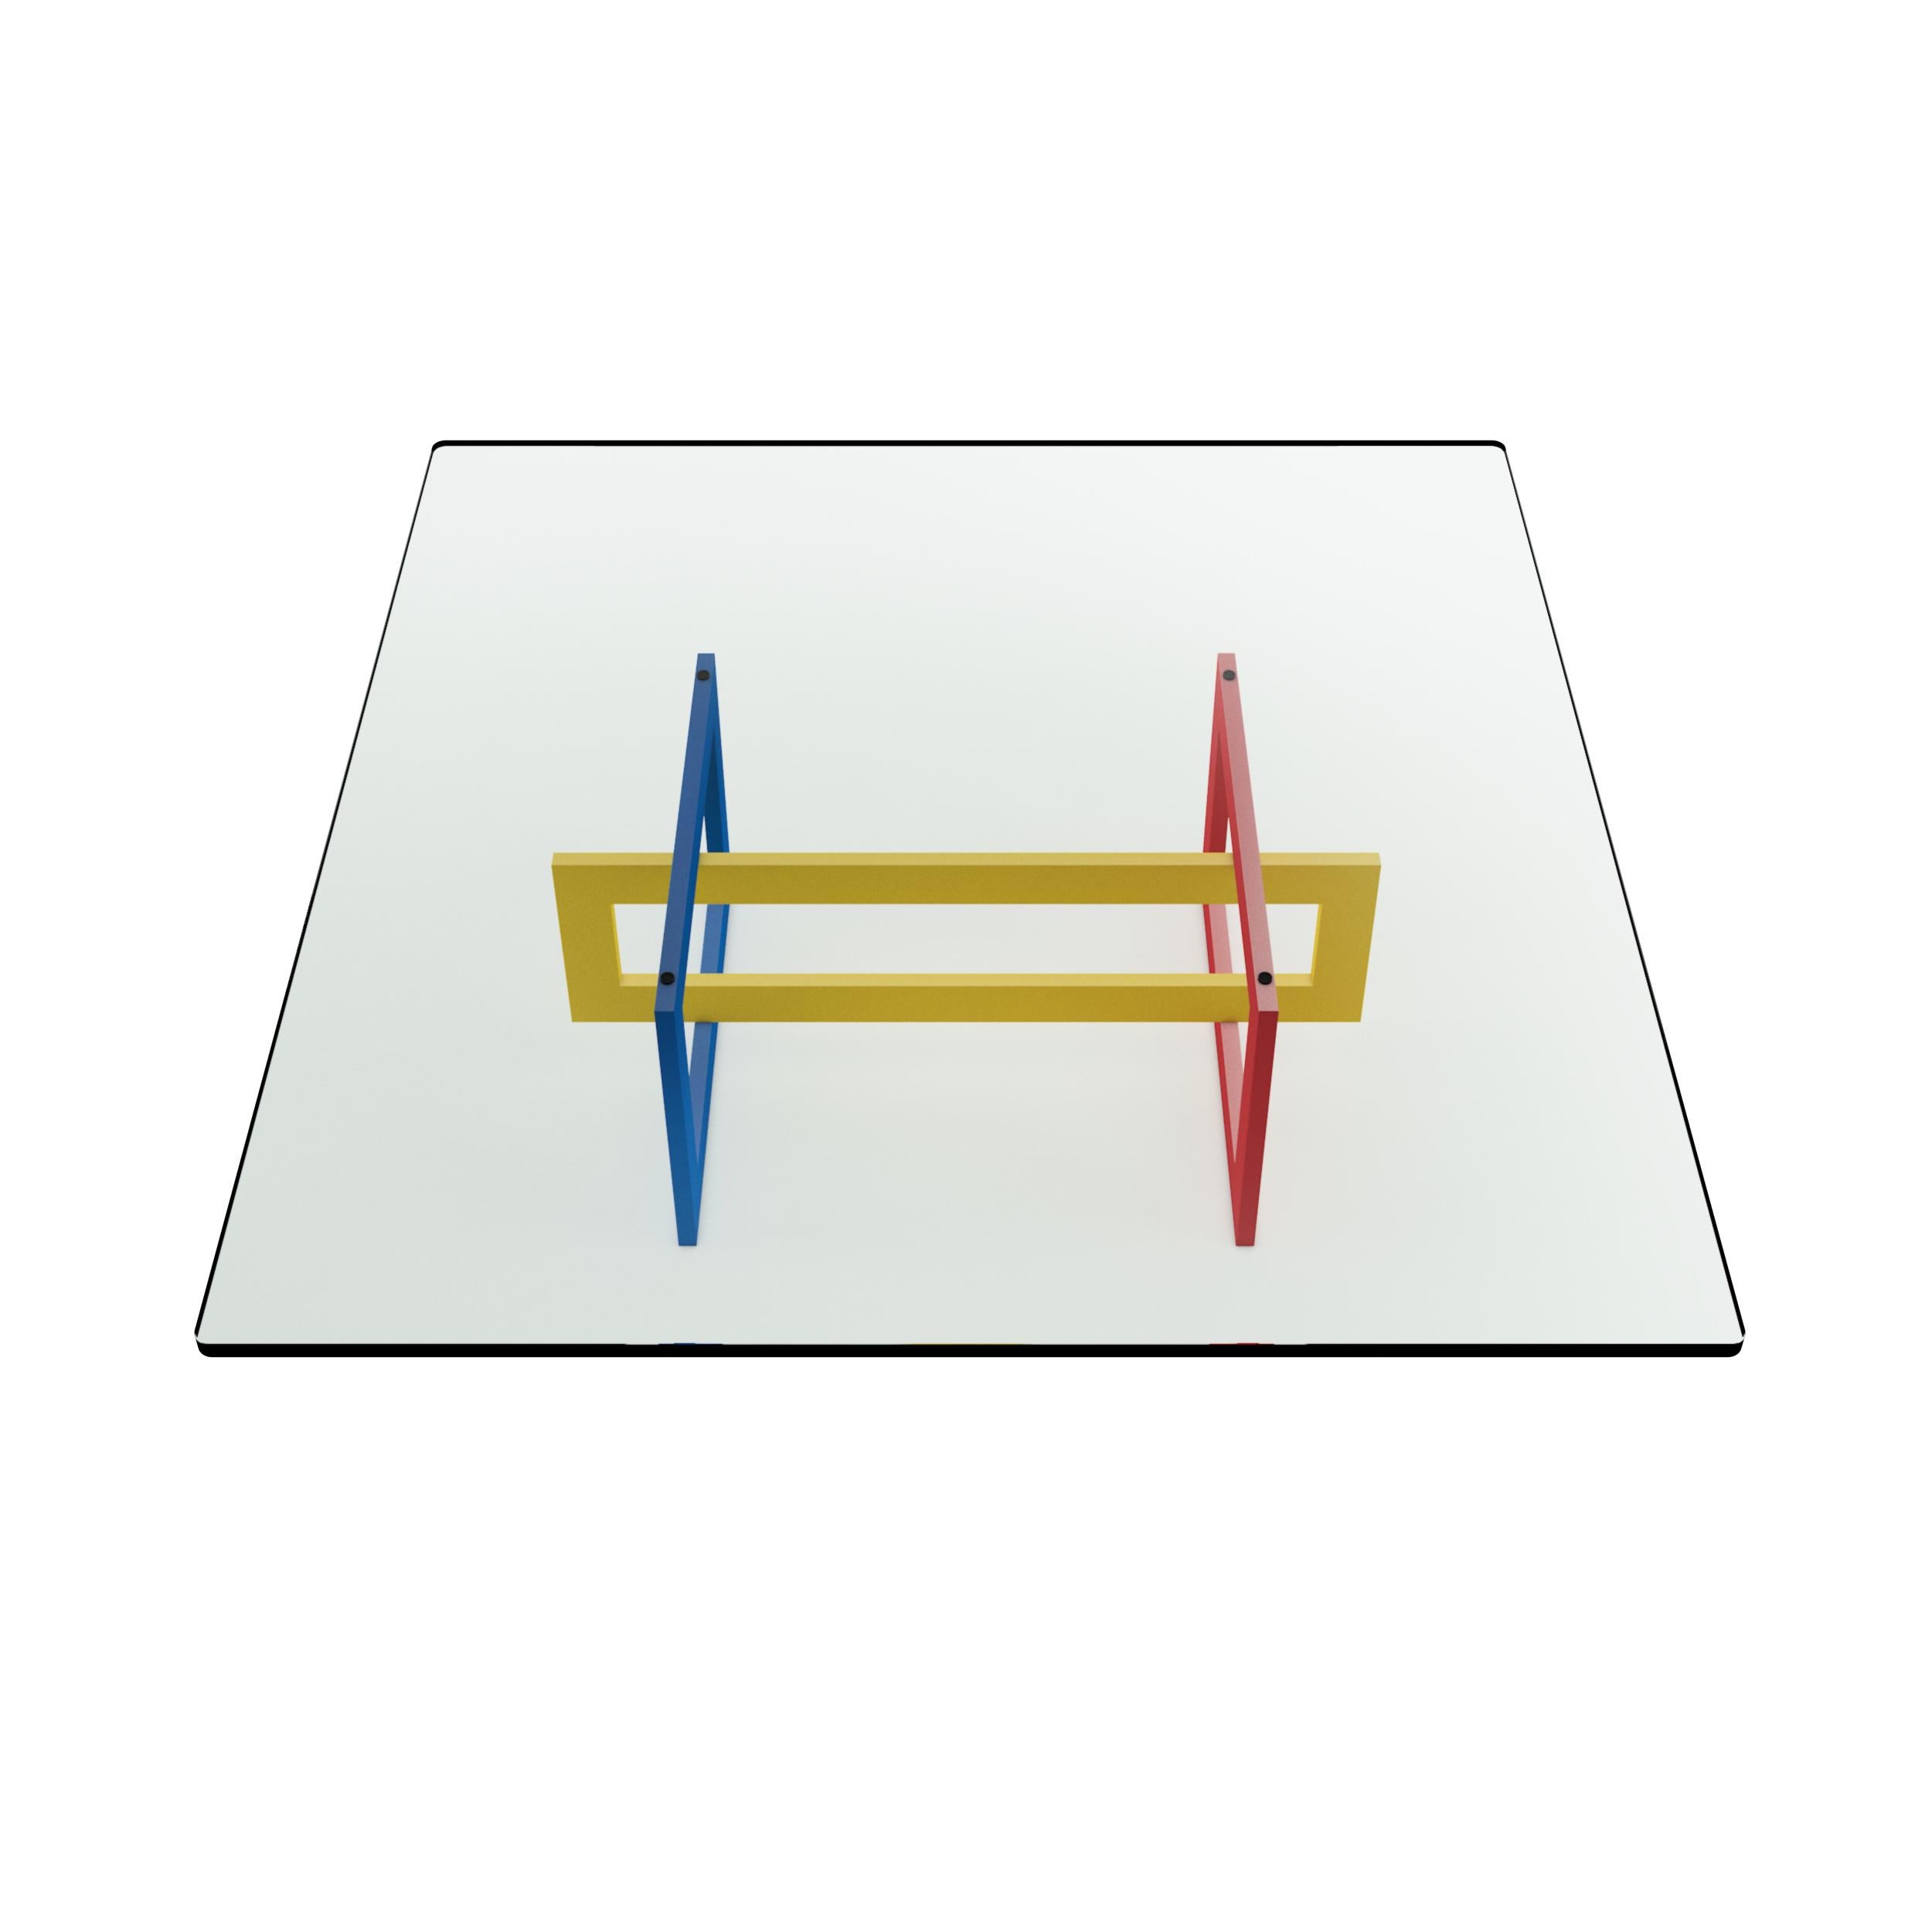 The low Jonathan table features a tubular metal 20 x 60mm frame, epoxy coated in glossy red, blue and yellow colors in the 